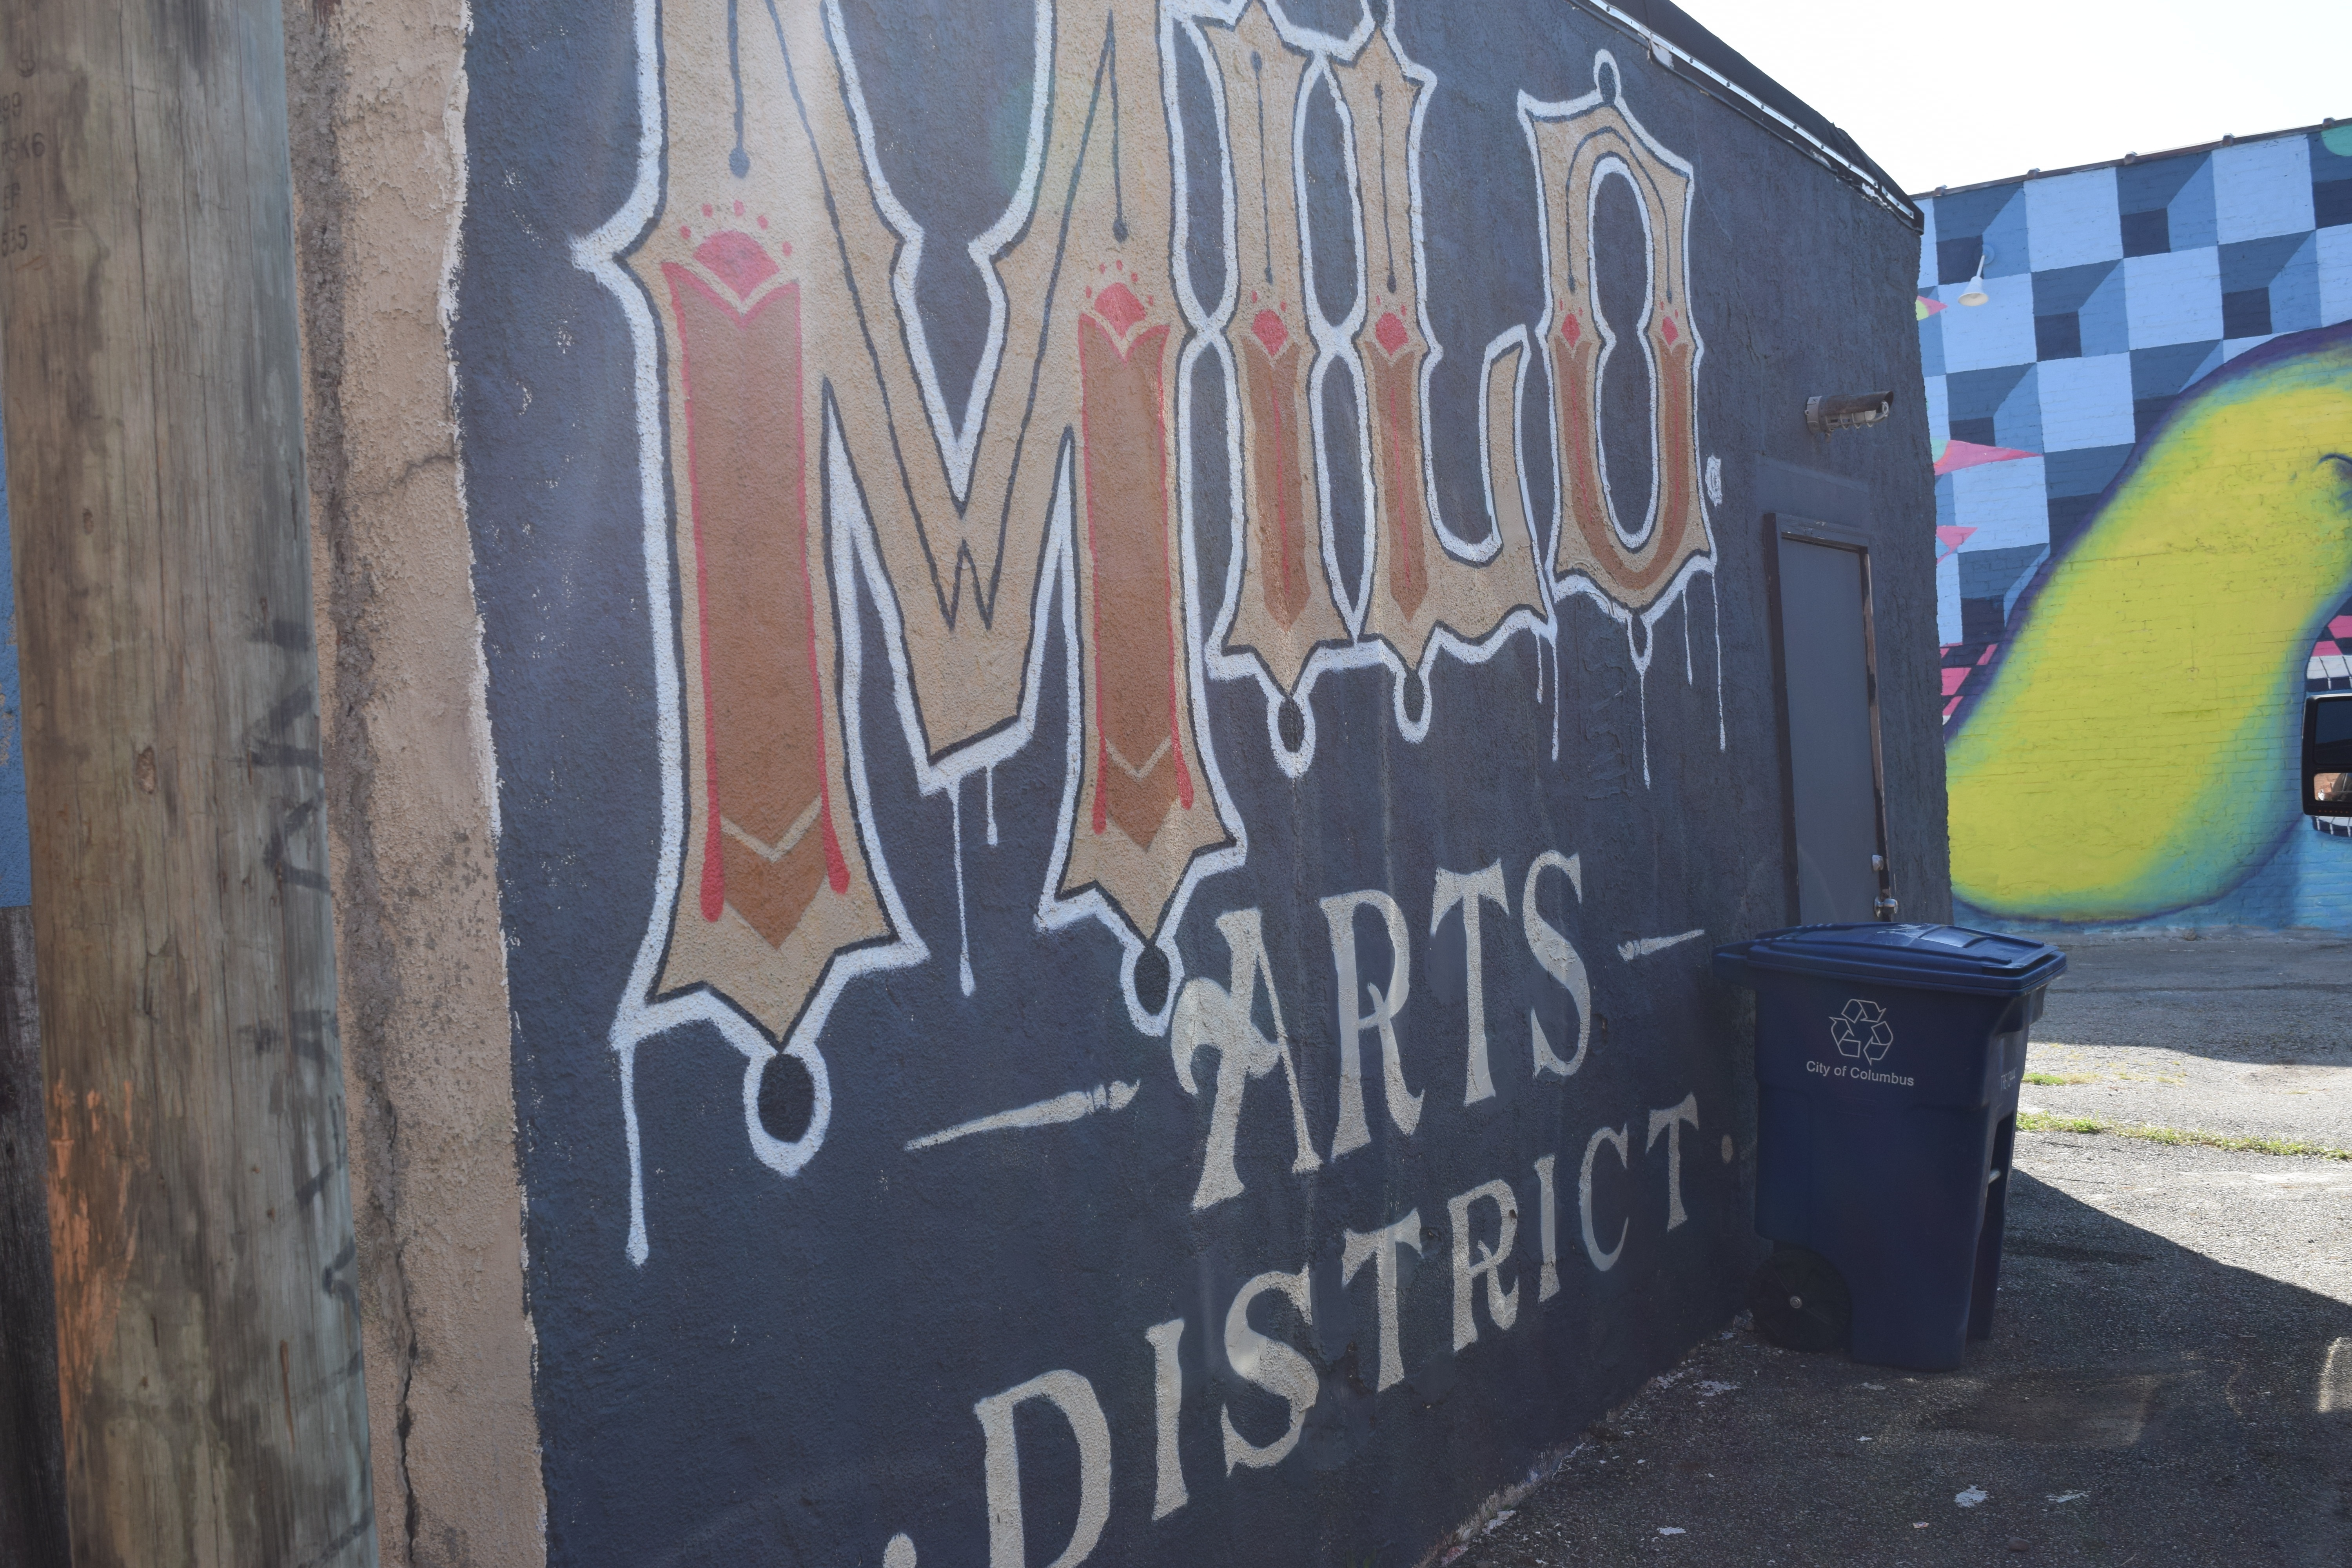 Milo Arts District (934 Outdoor Gallery- Permanent Collection)